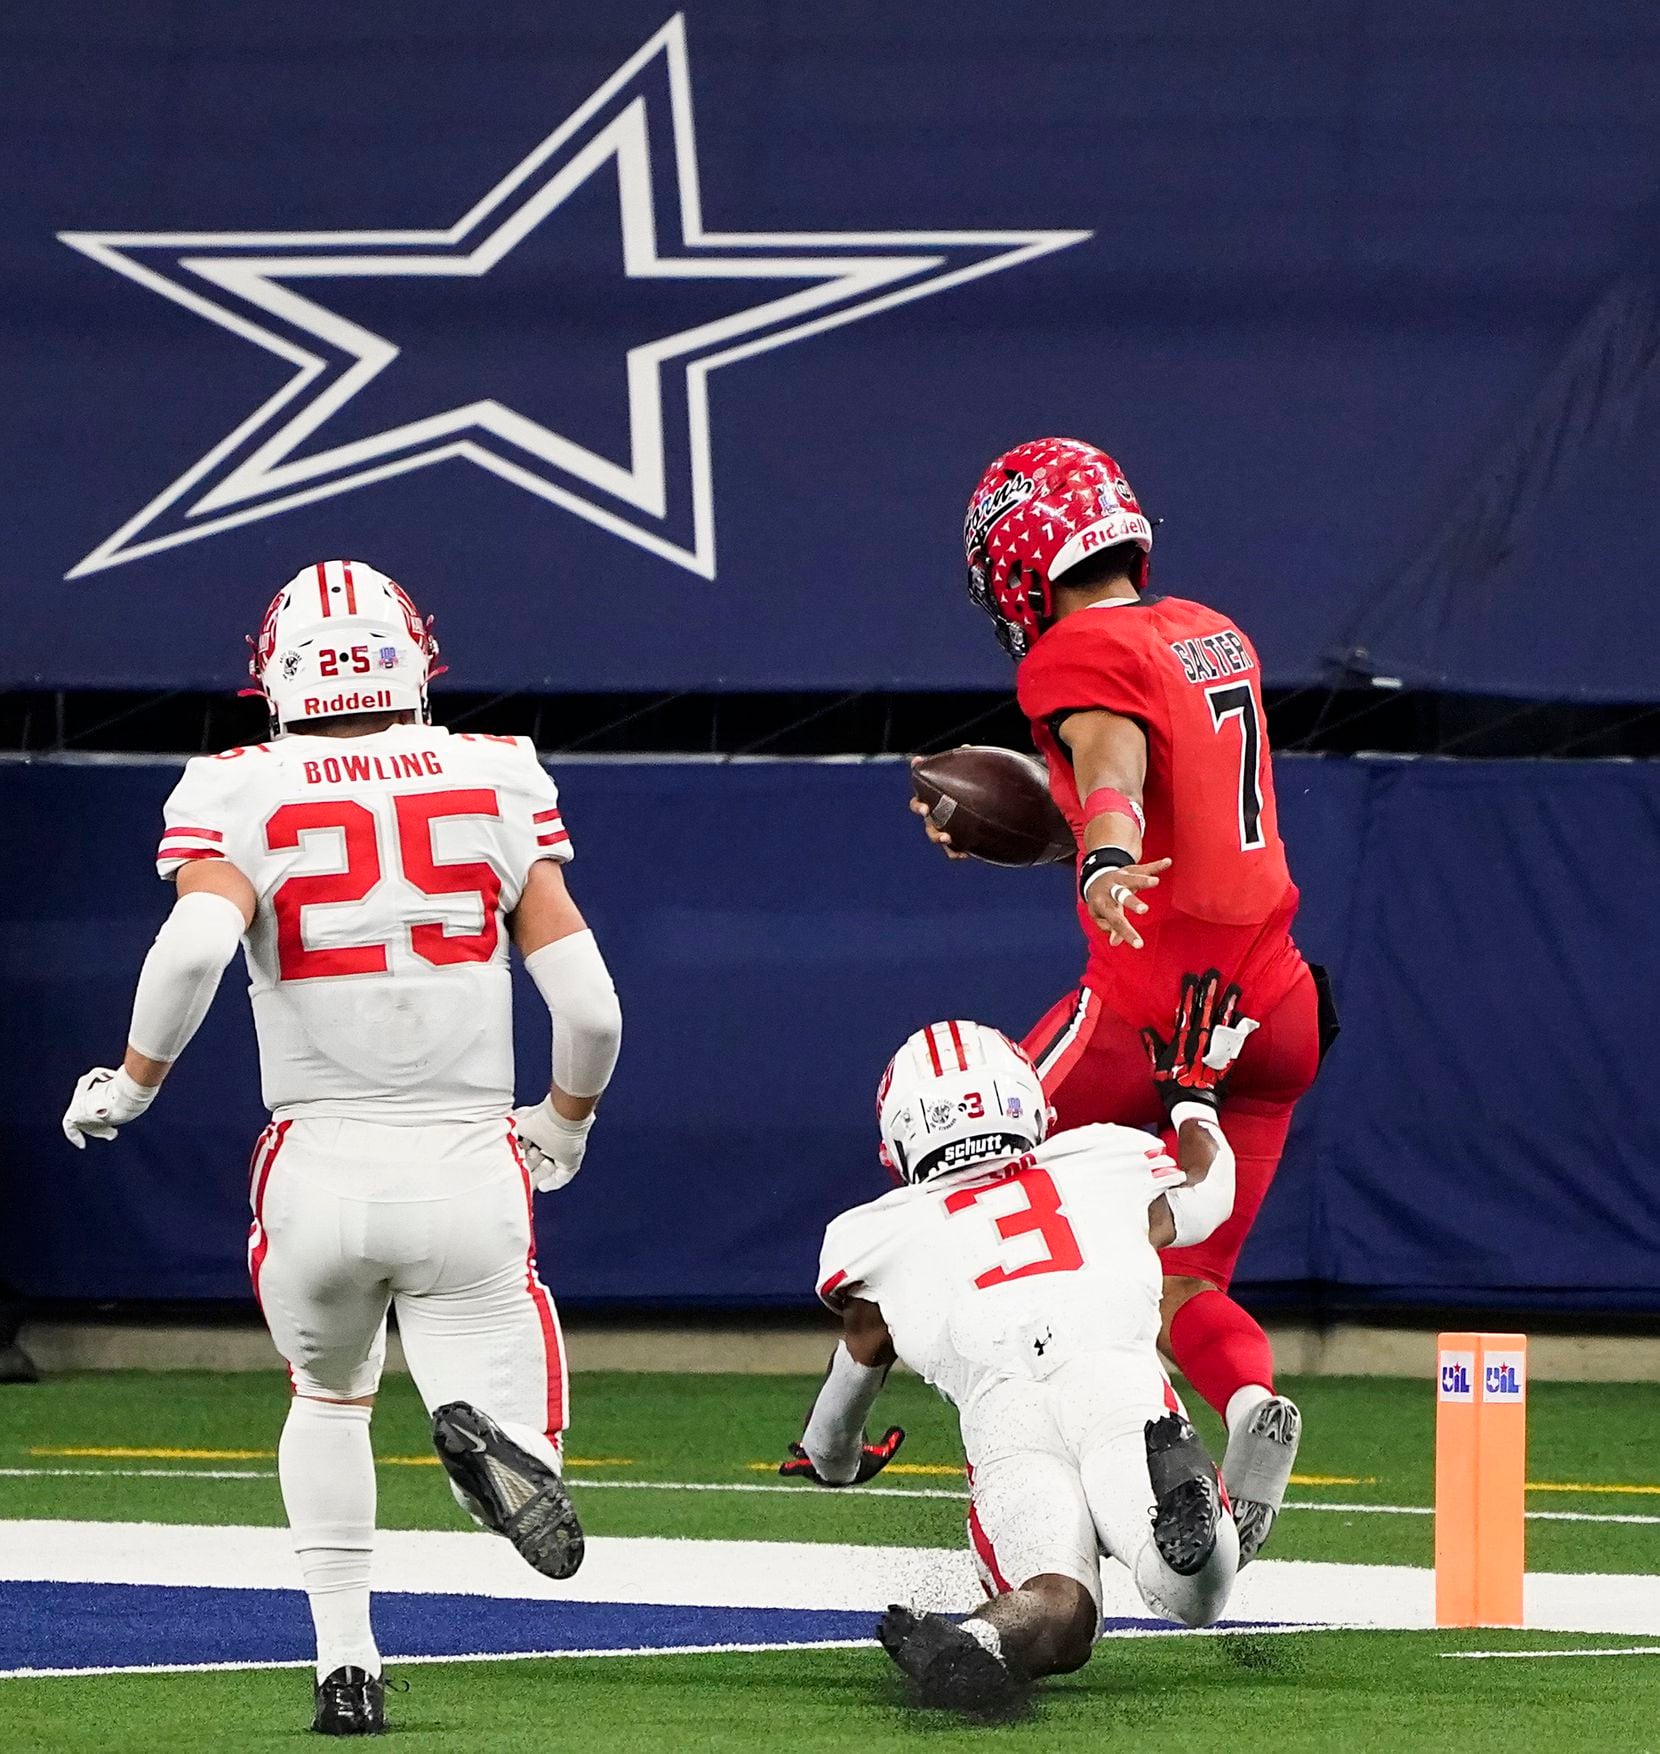 Cedar Hill quarterback Kaidon Salter (7) gets past Katy defensive back Bobby Taylor (3) and Shepherd Bowling (25) for a 10-yard touchdown during the second half of the Class 6A Division II state football championship game at AT&T Stadium on Saturday, Jan. 16, 2021, in Arlington, Texas. Katy won the game 51-14.